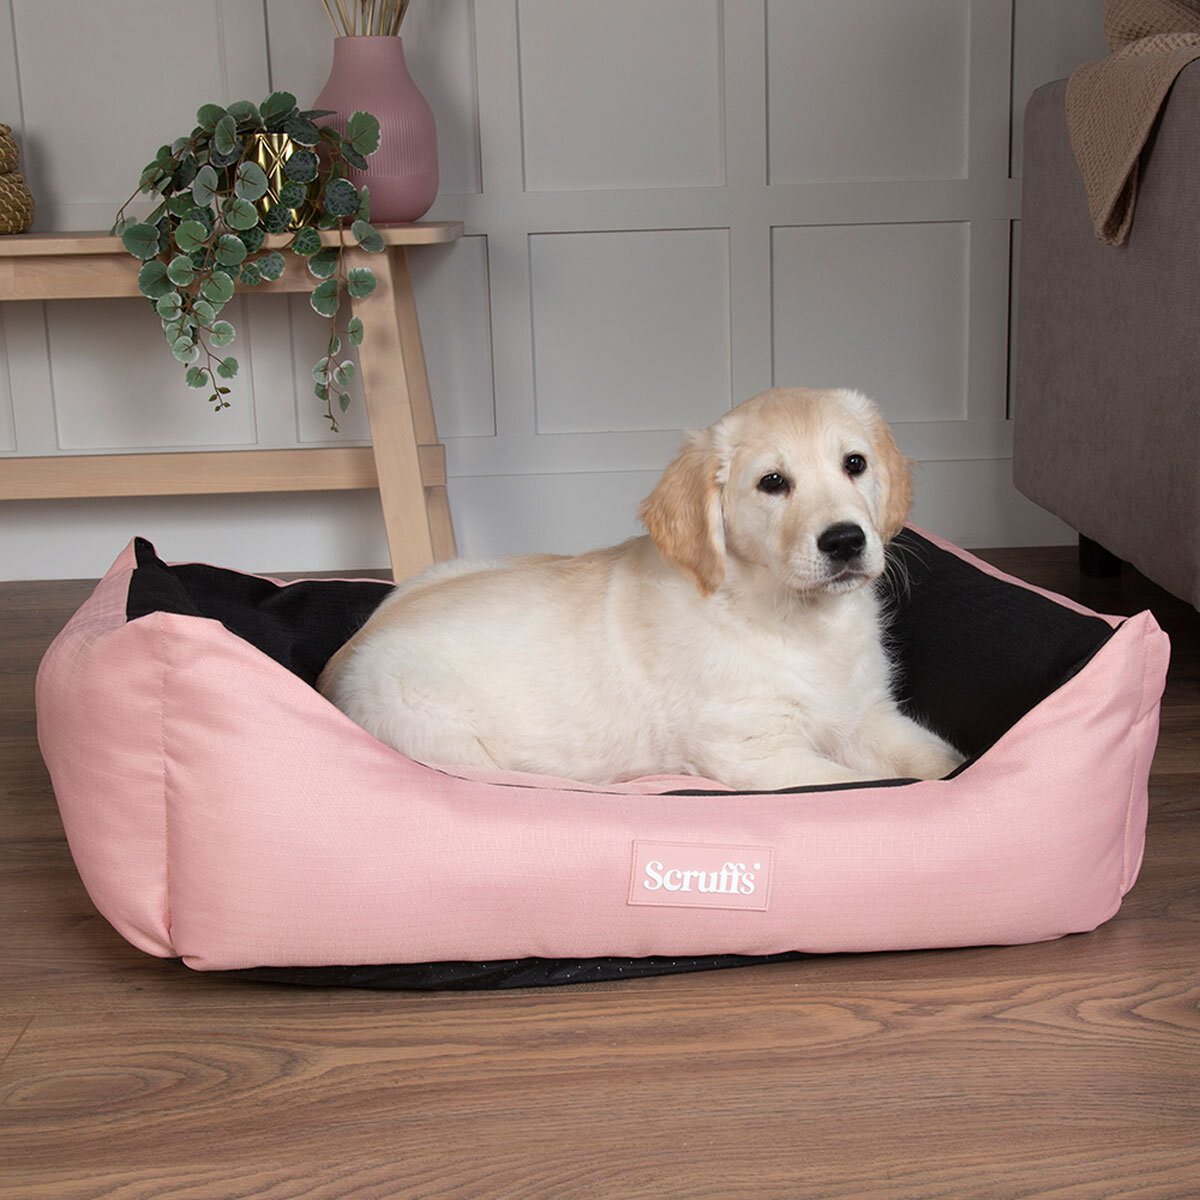 Scruffs Expedition Box Pet Bed, 24" x 19.5" (60cm x 50cm) in Pink